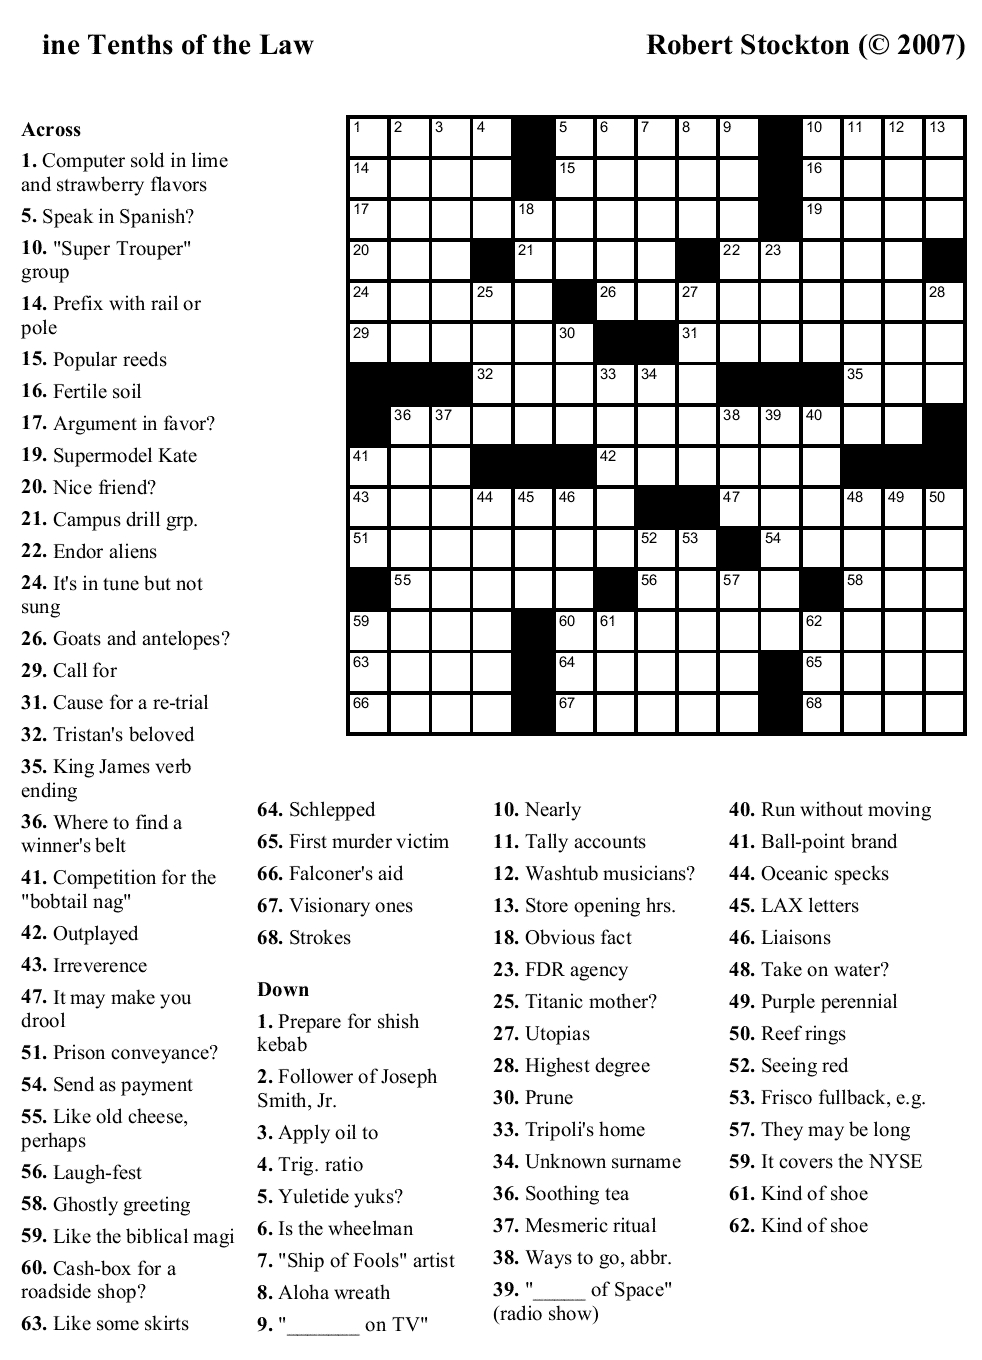 Crossword Puzzles Printable - Yahoo Image Search Results | Crossword - Printable Crossword Puzzles Best